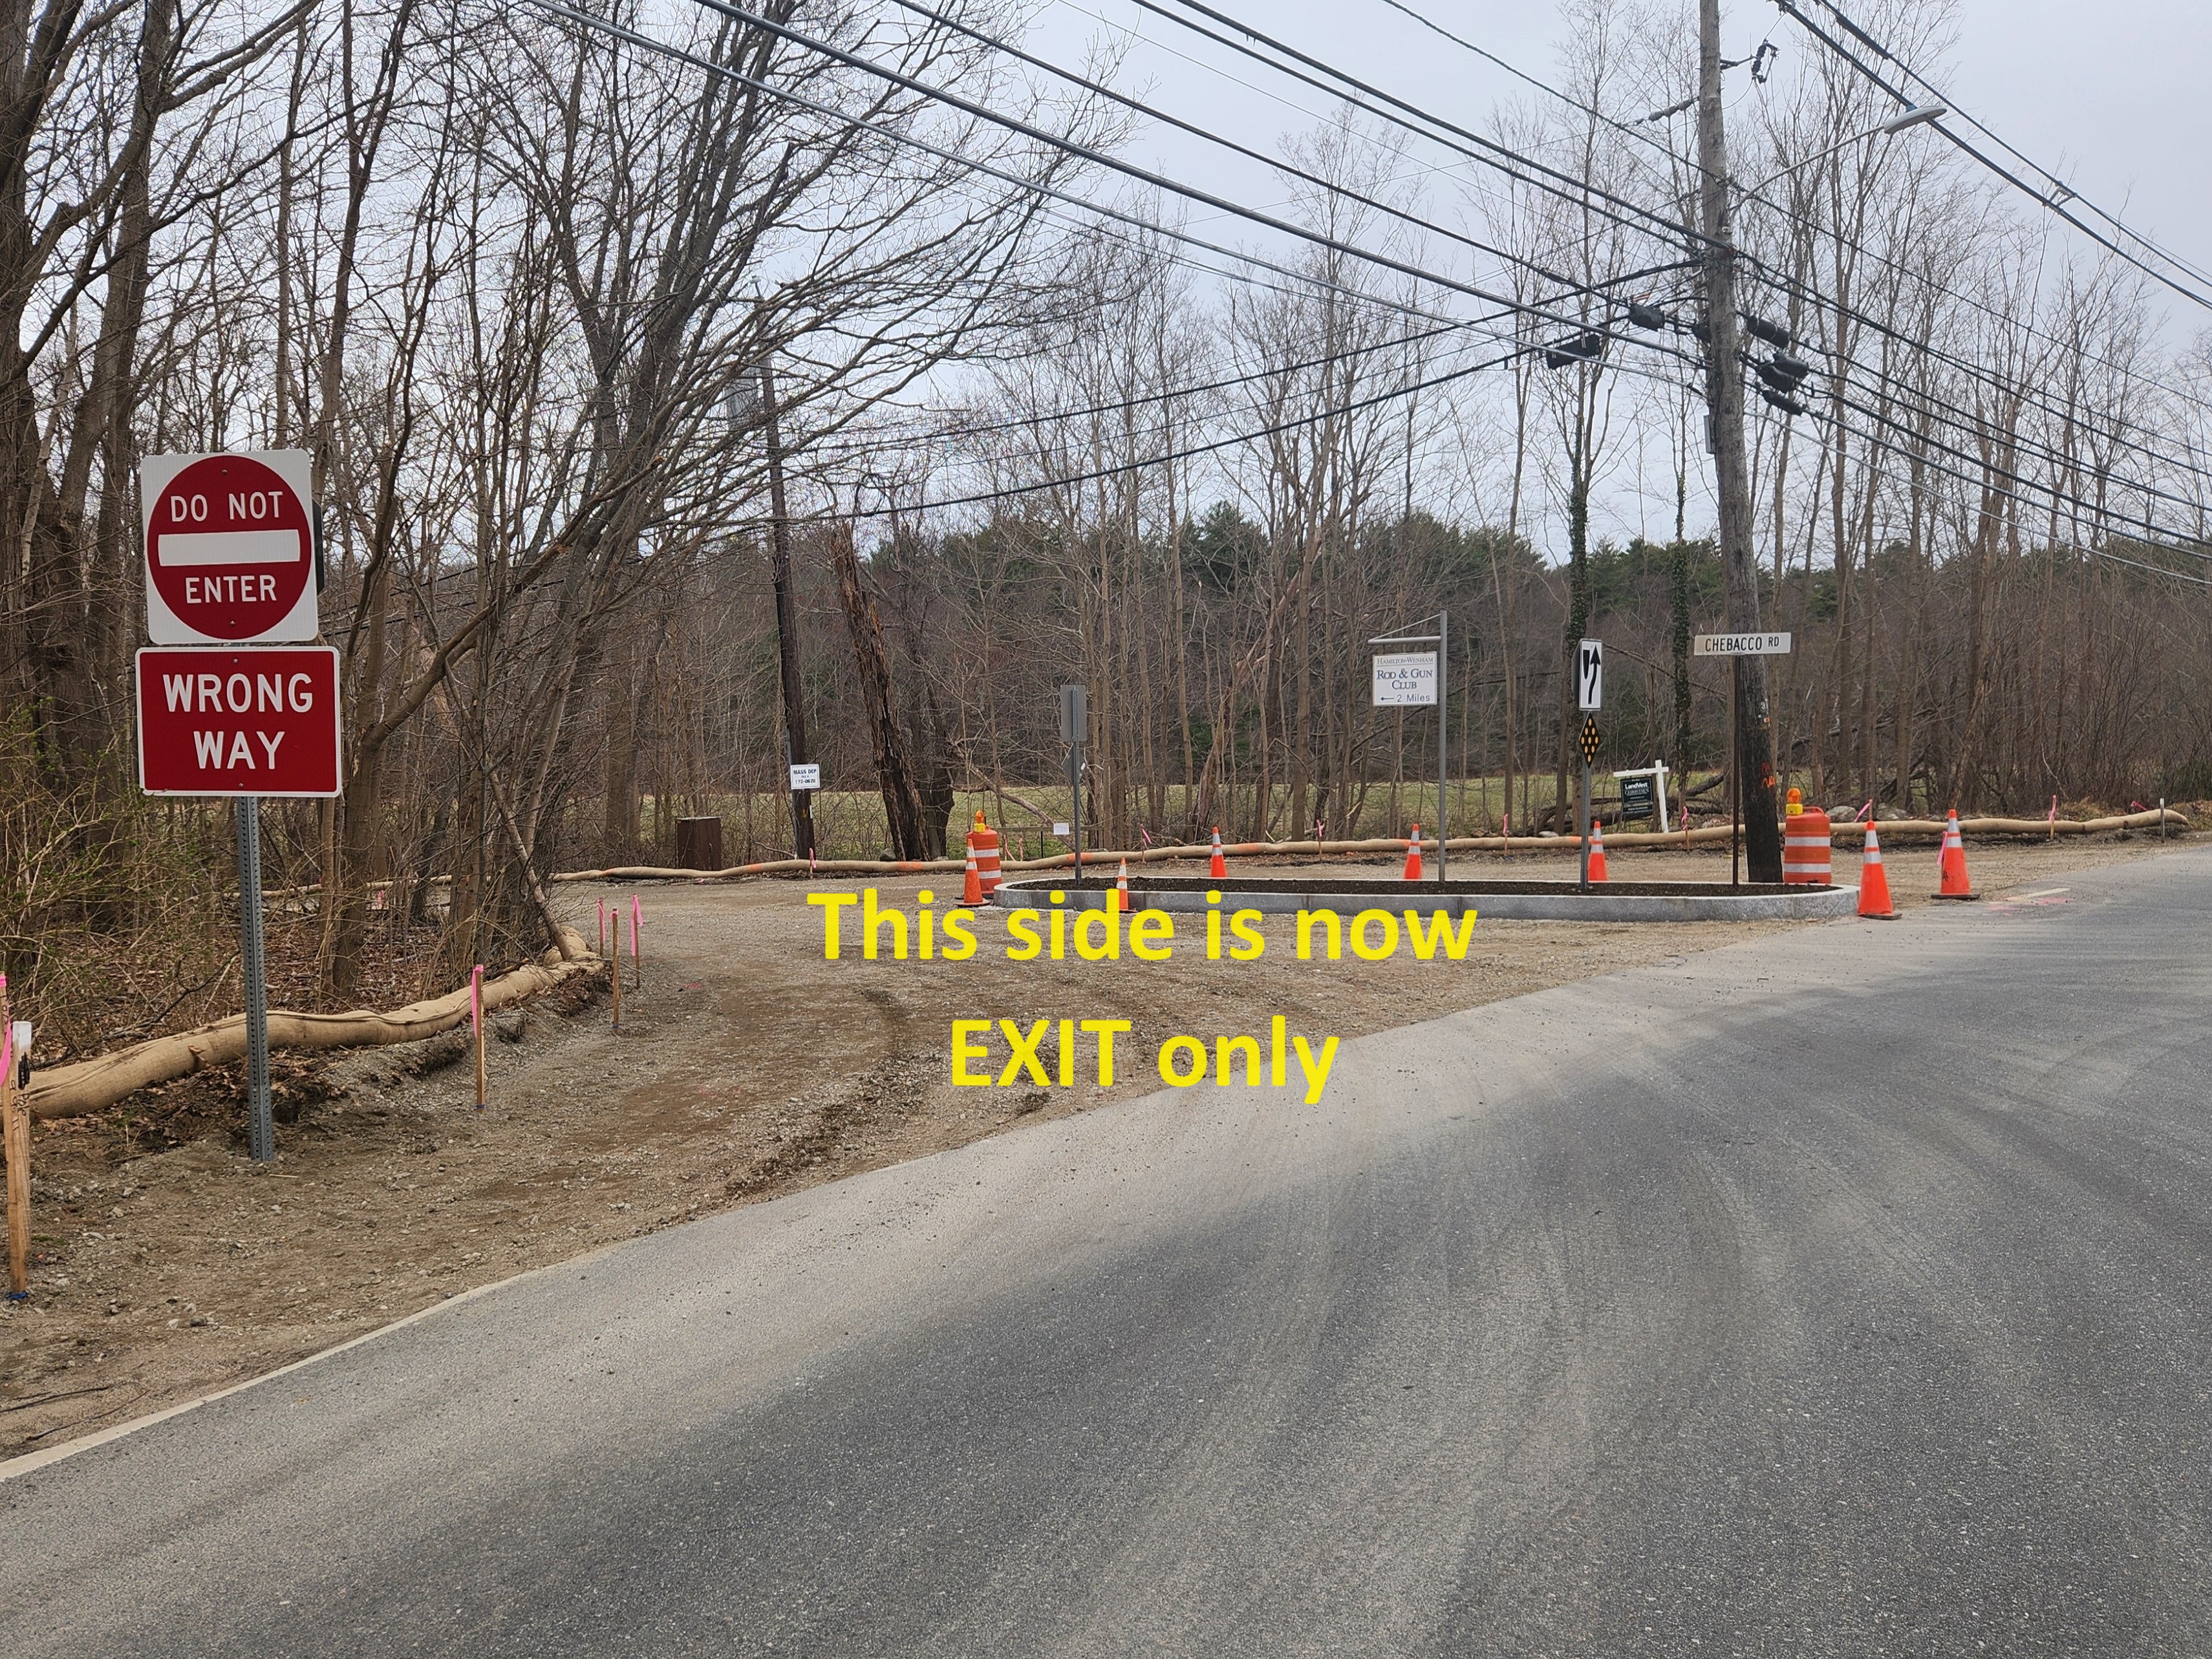 New traffic flow change for Chebacco Rd at Essex St intersection.